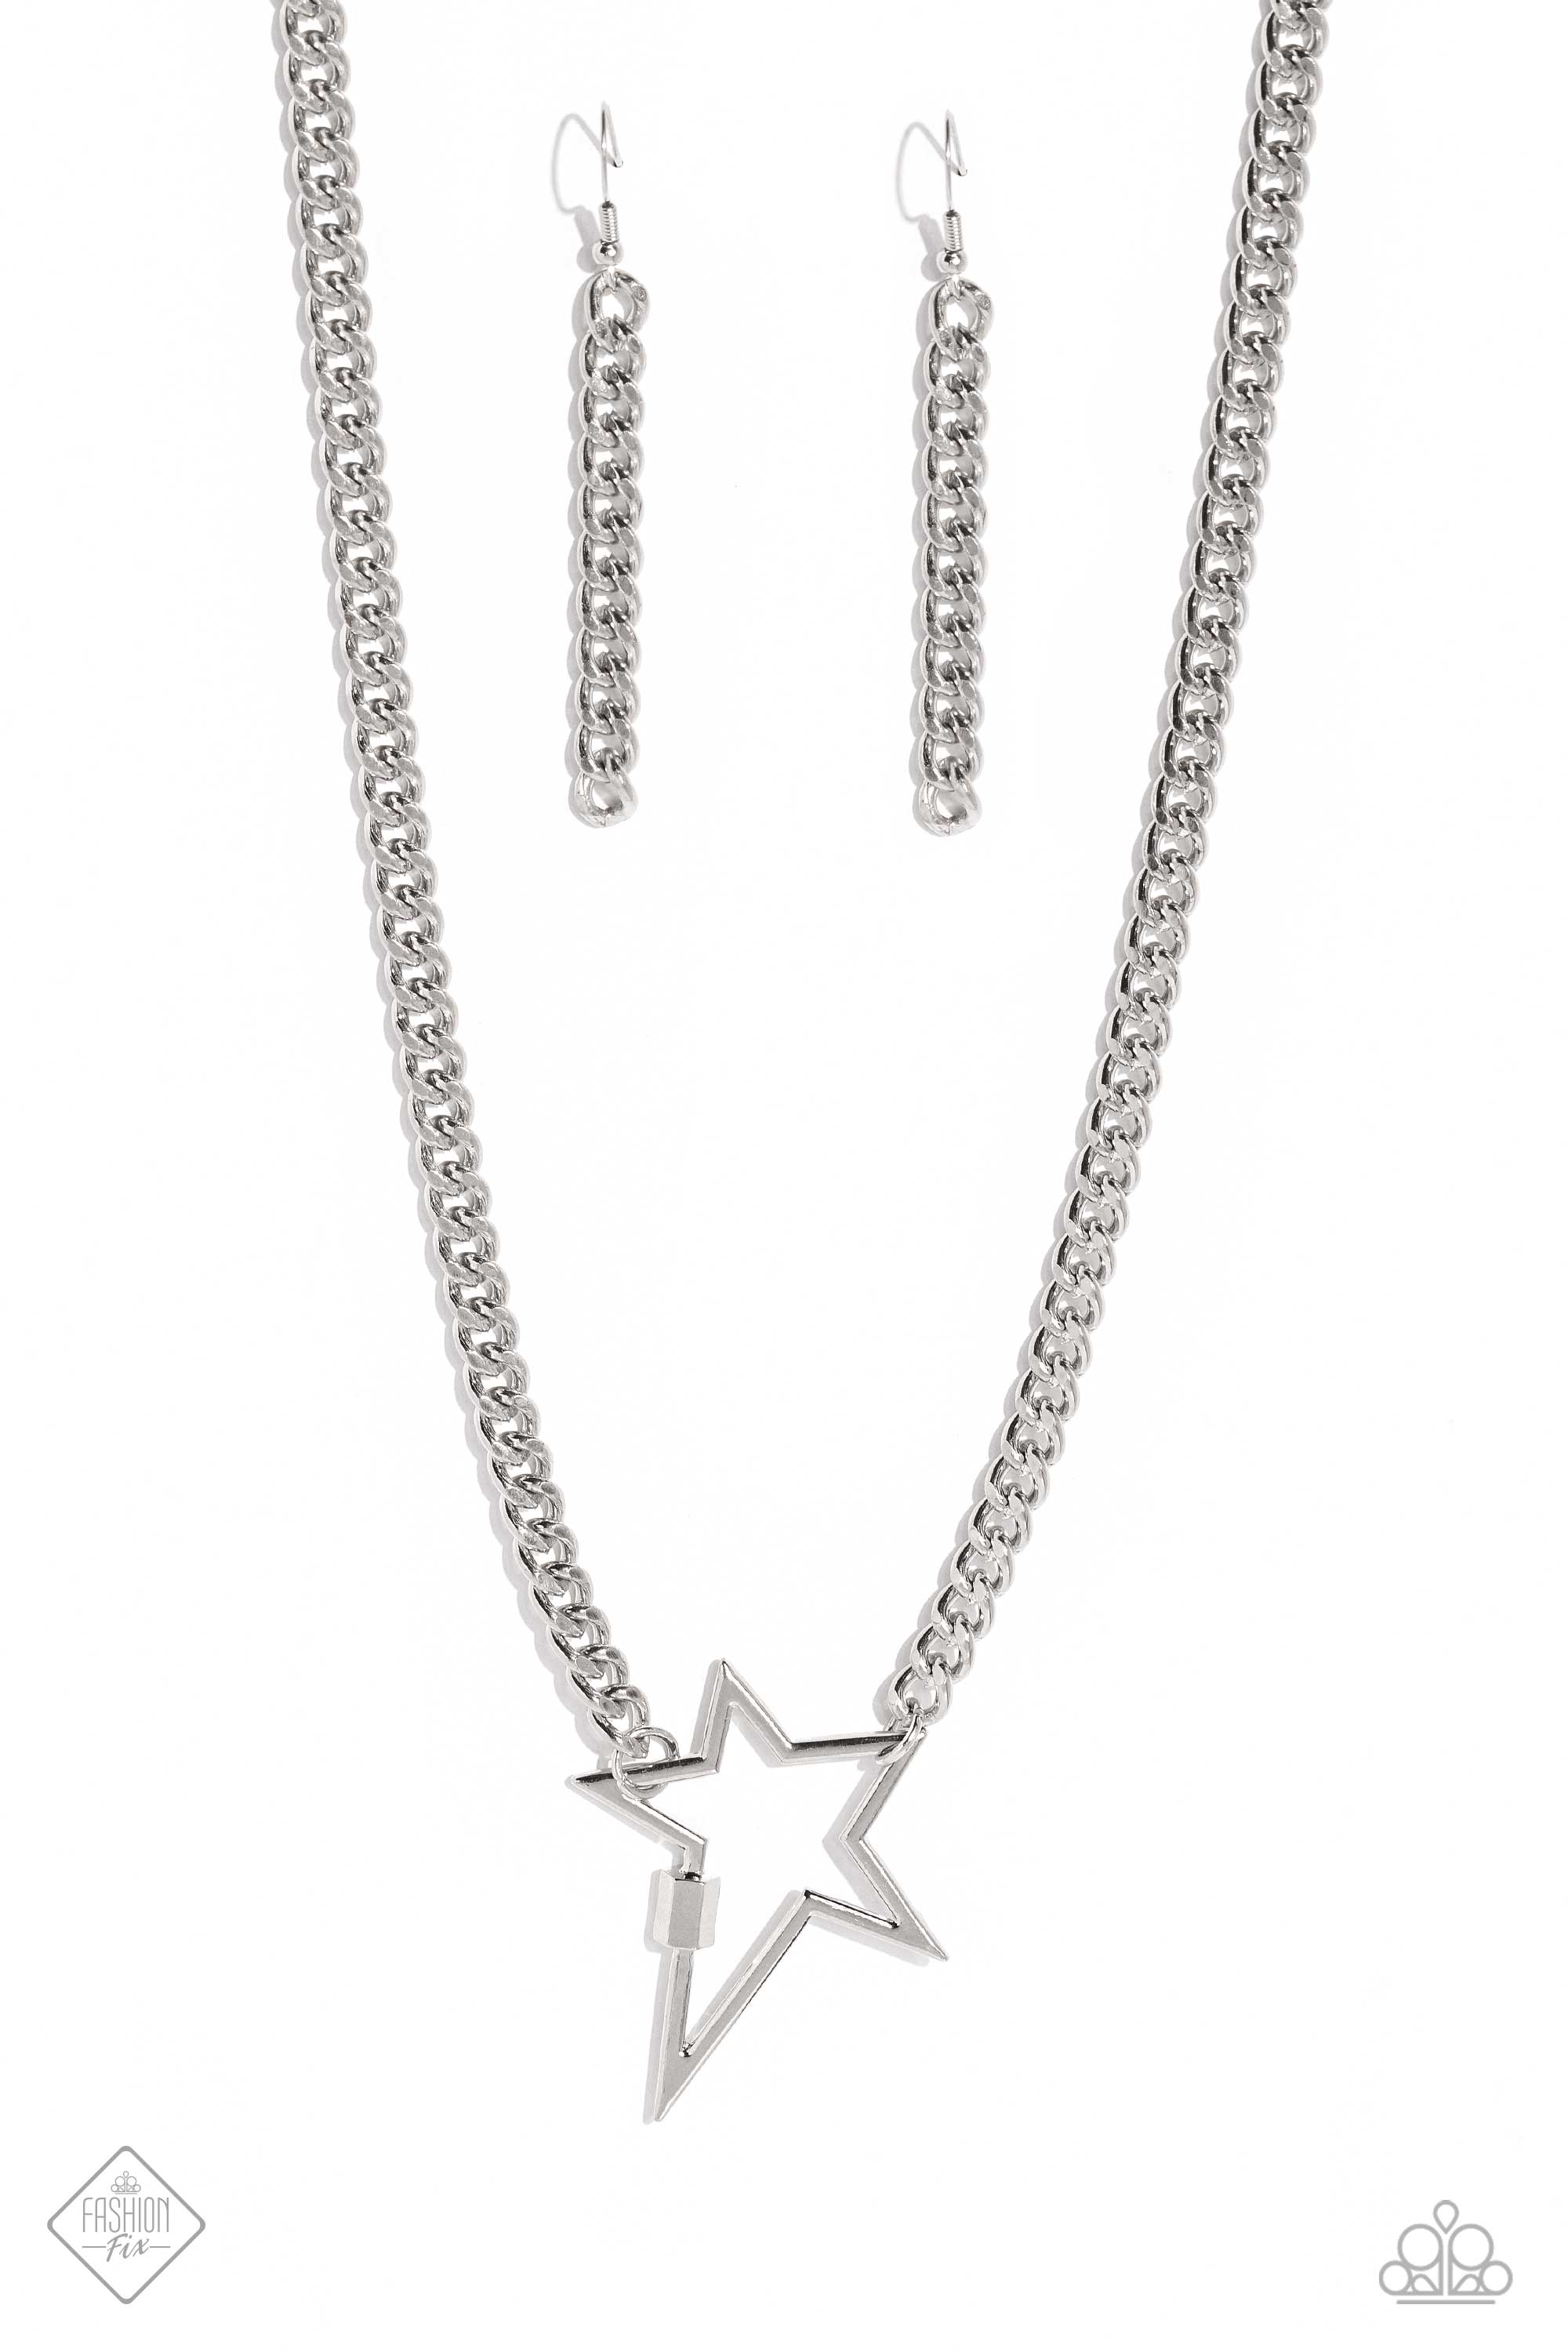 Playful Popstar Silver Necklace - Paparazzi Accessories- lightbox - CarasShop.com - $5 Jewelry by Cara Jewels